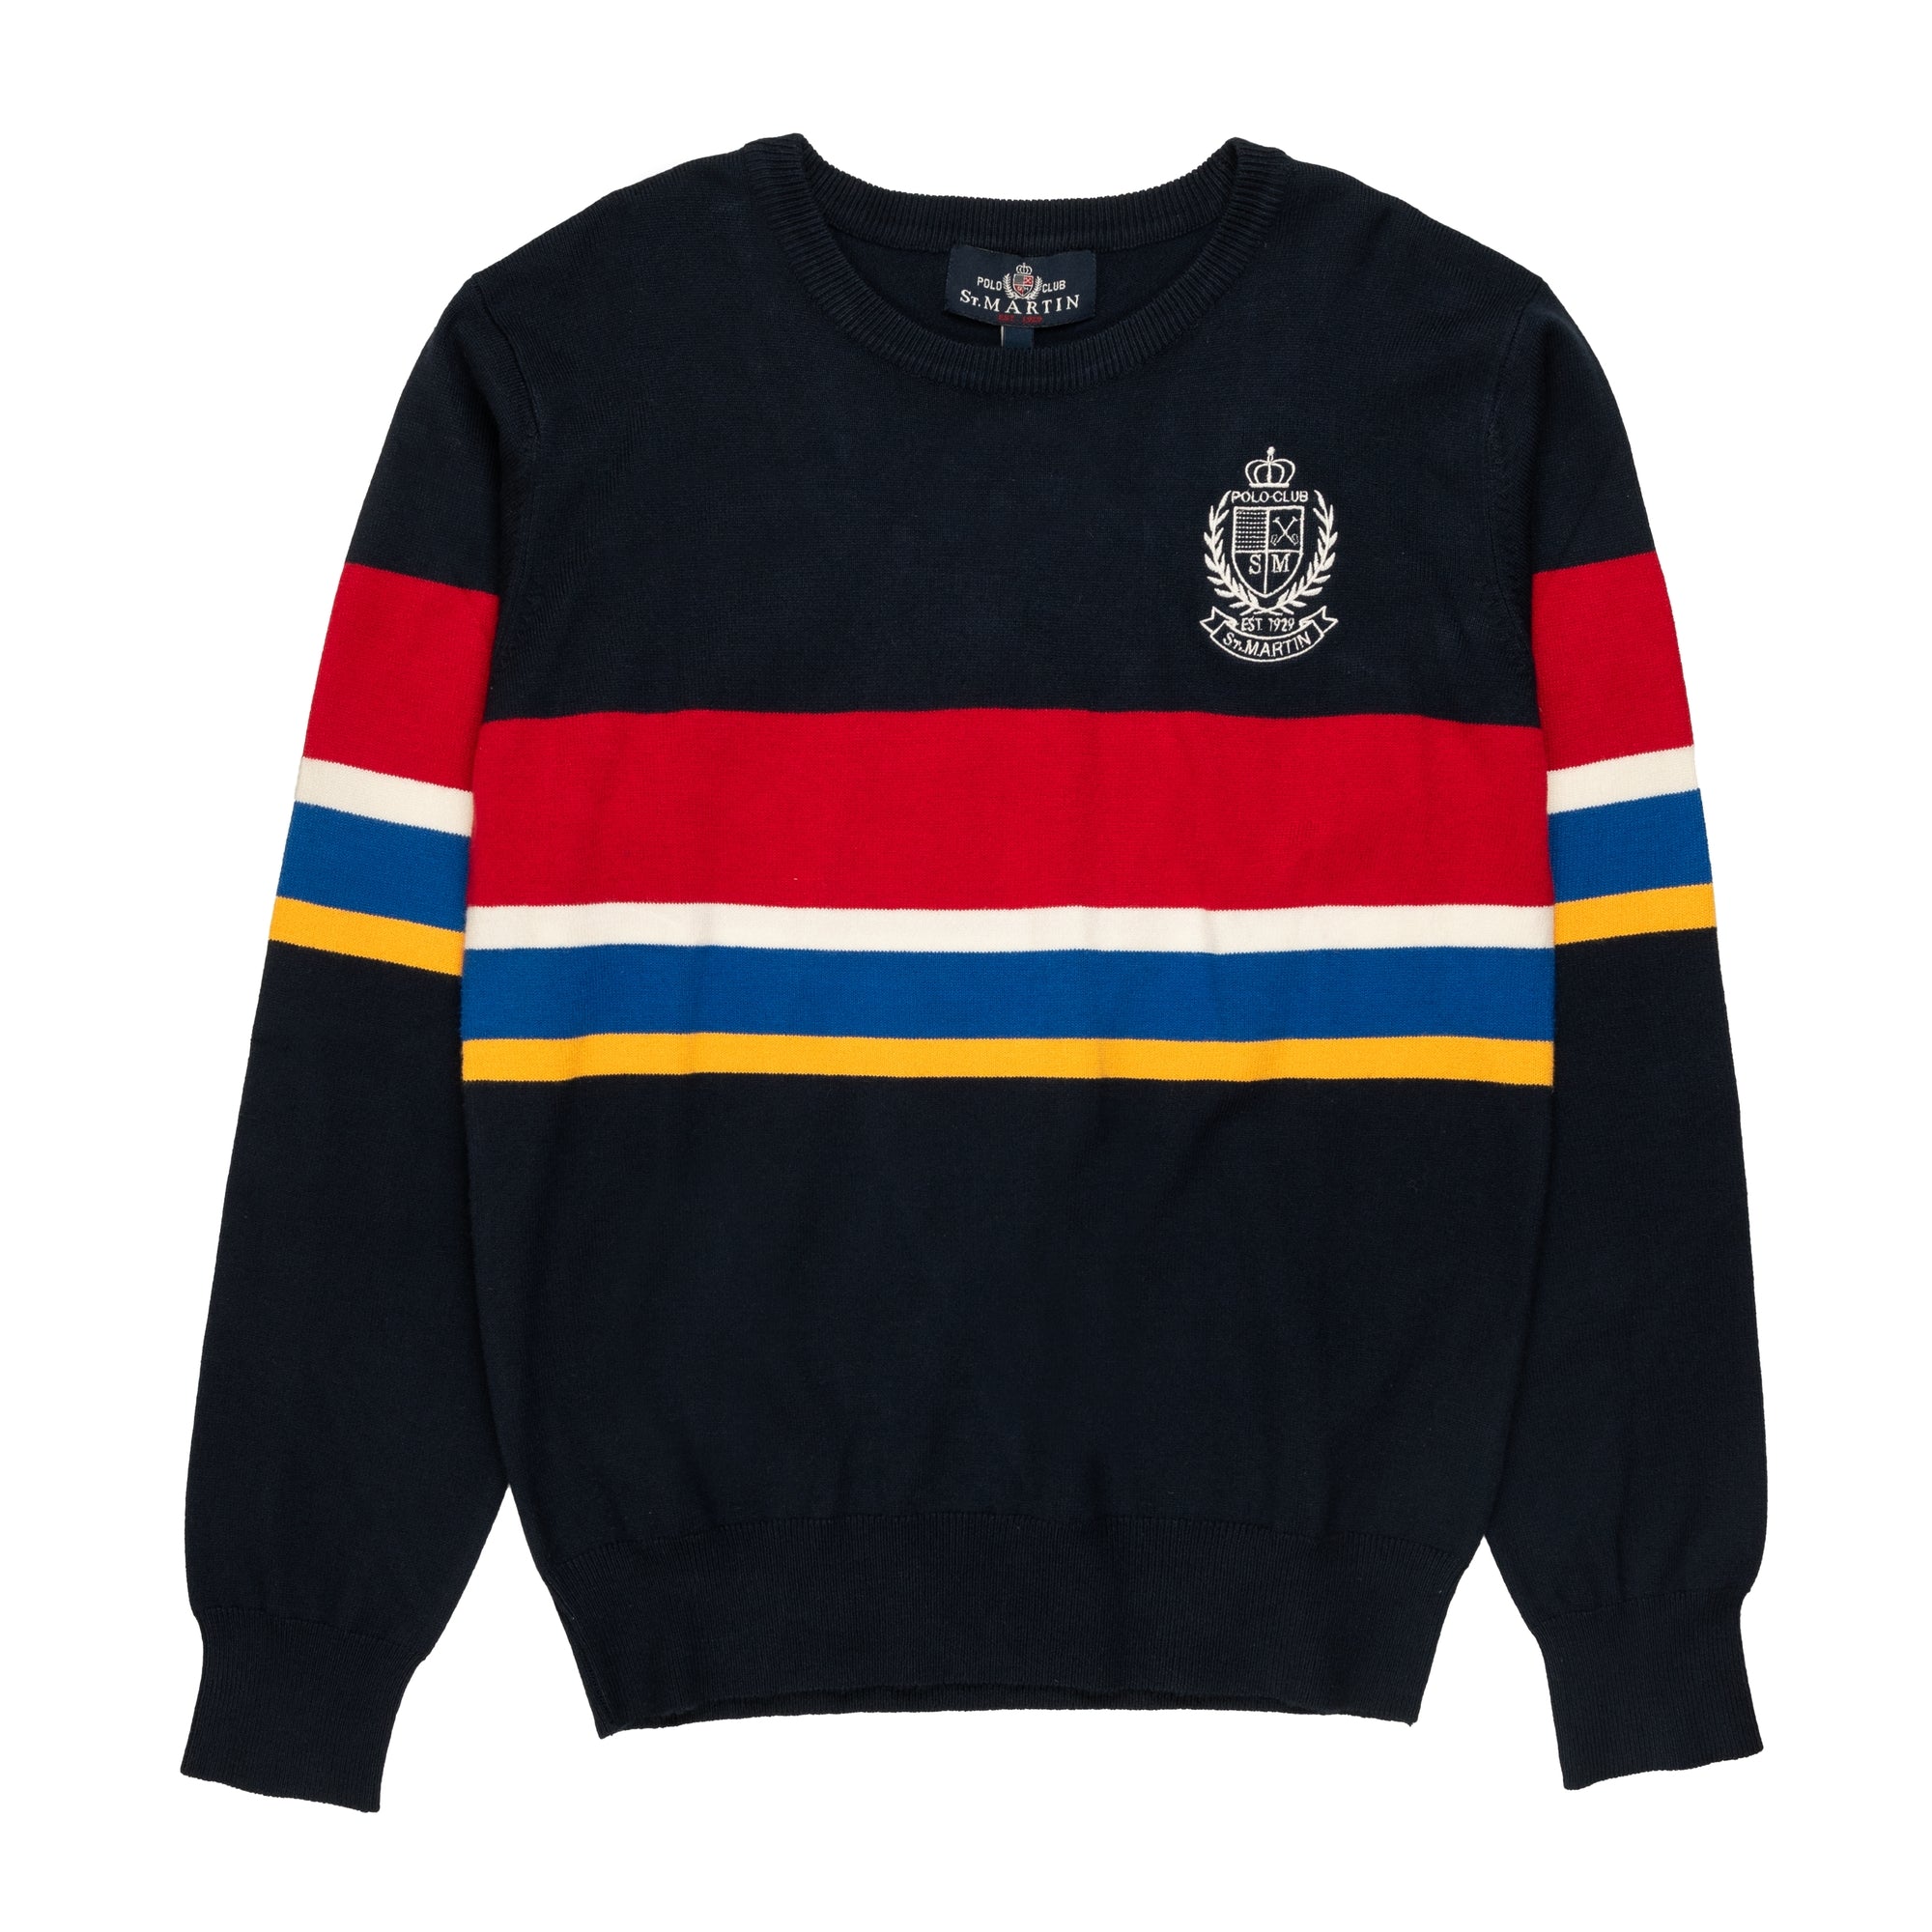 12 gauge crew neck with logo embroidery and colored bands